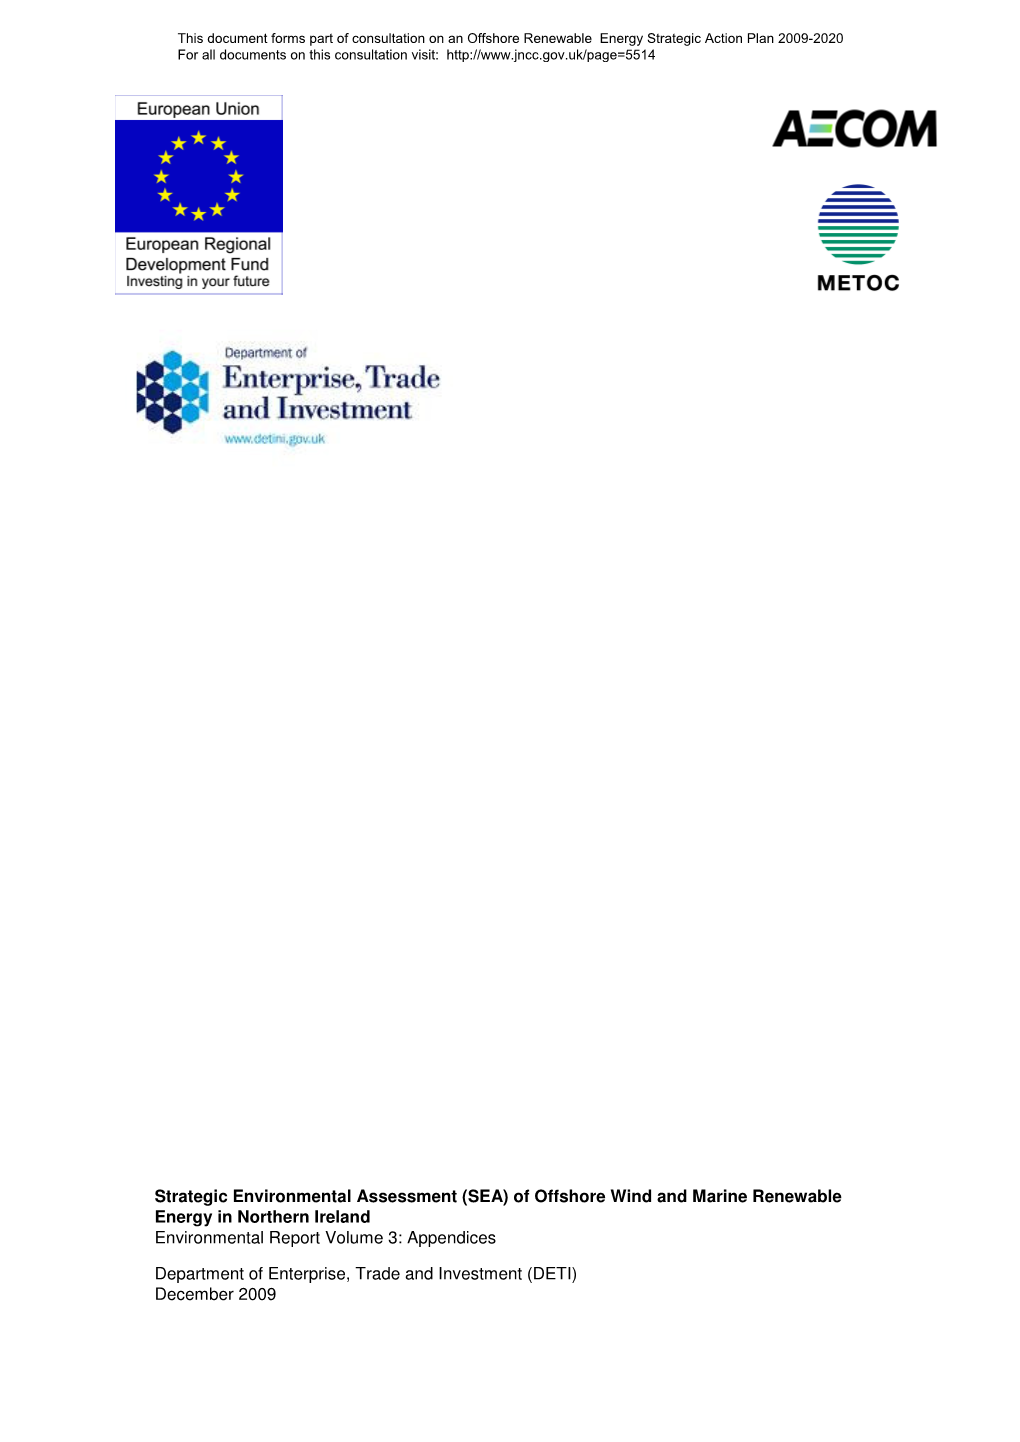 Strategic Environmental Assessment (SEA) of Offshore Wind and Marine Renewable Energy in Northern Ireland Environmental Report Volume 3: Appendices